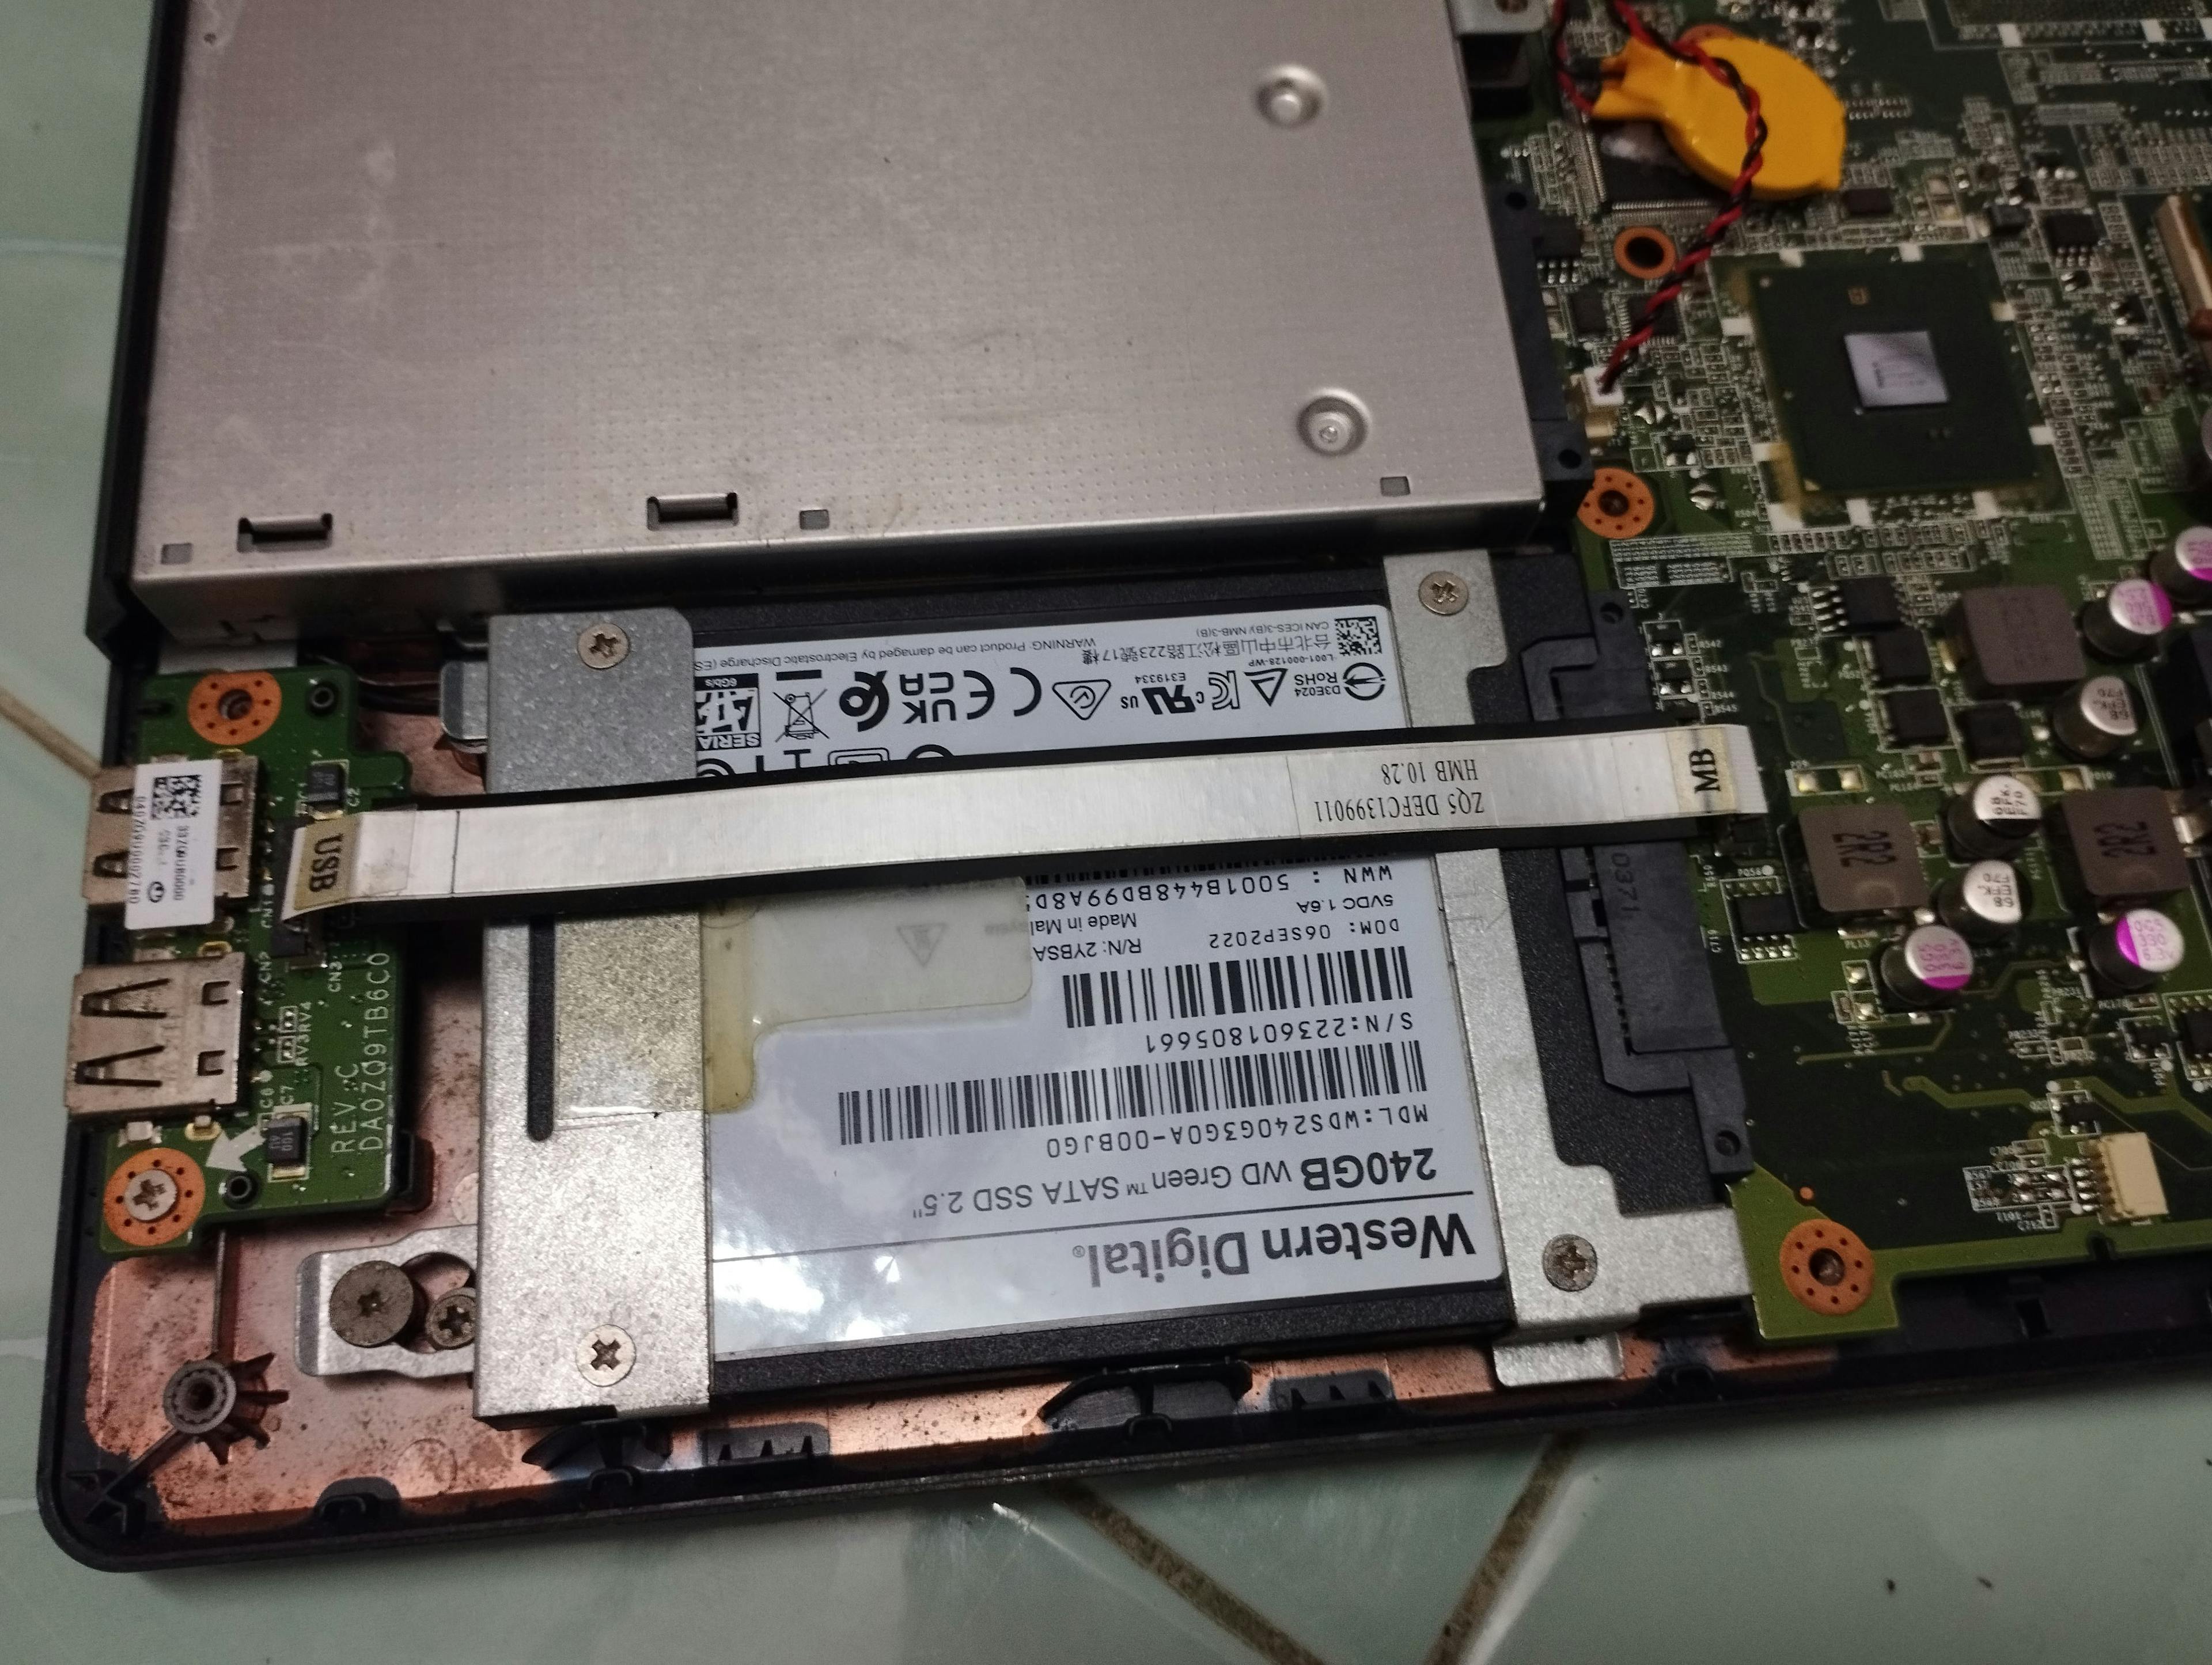 SSD WD installed